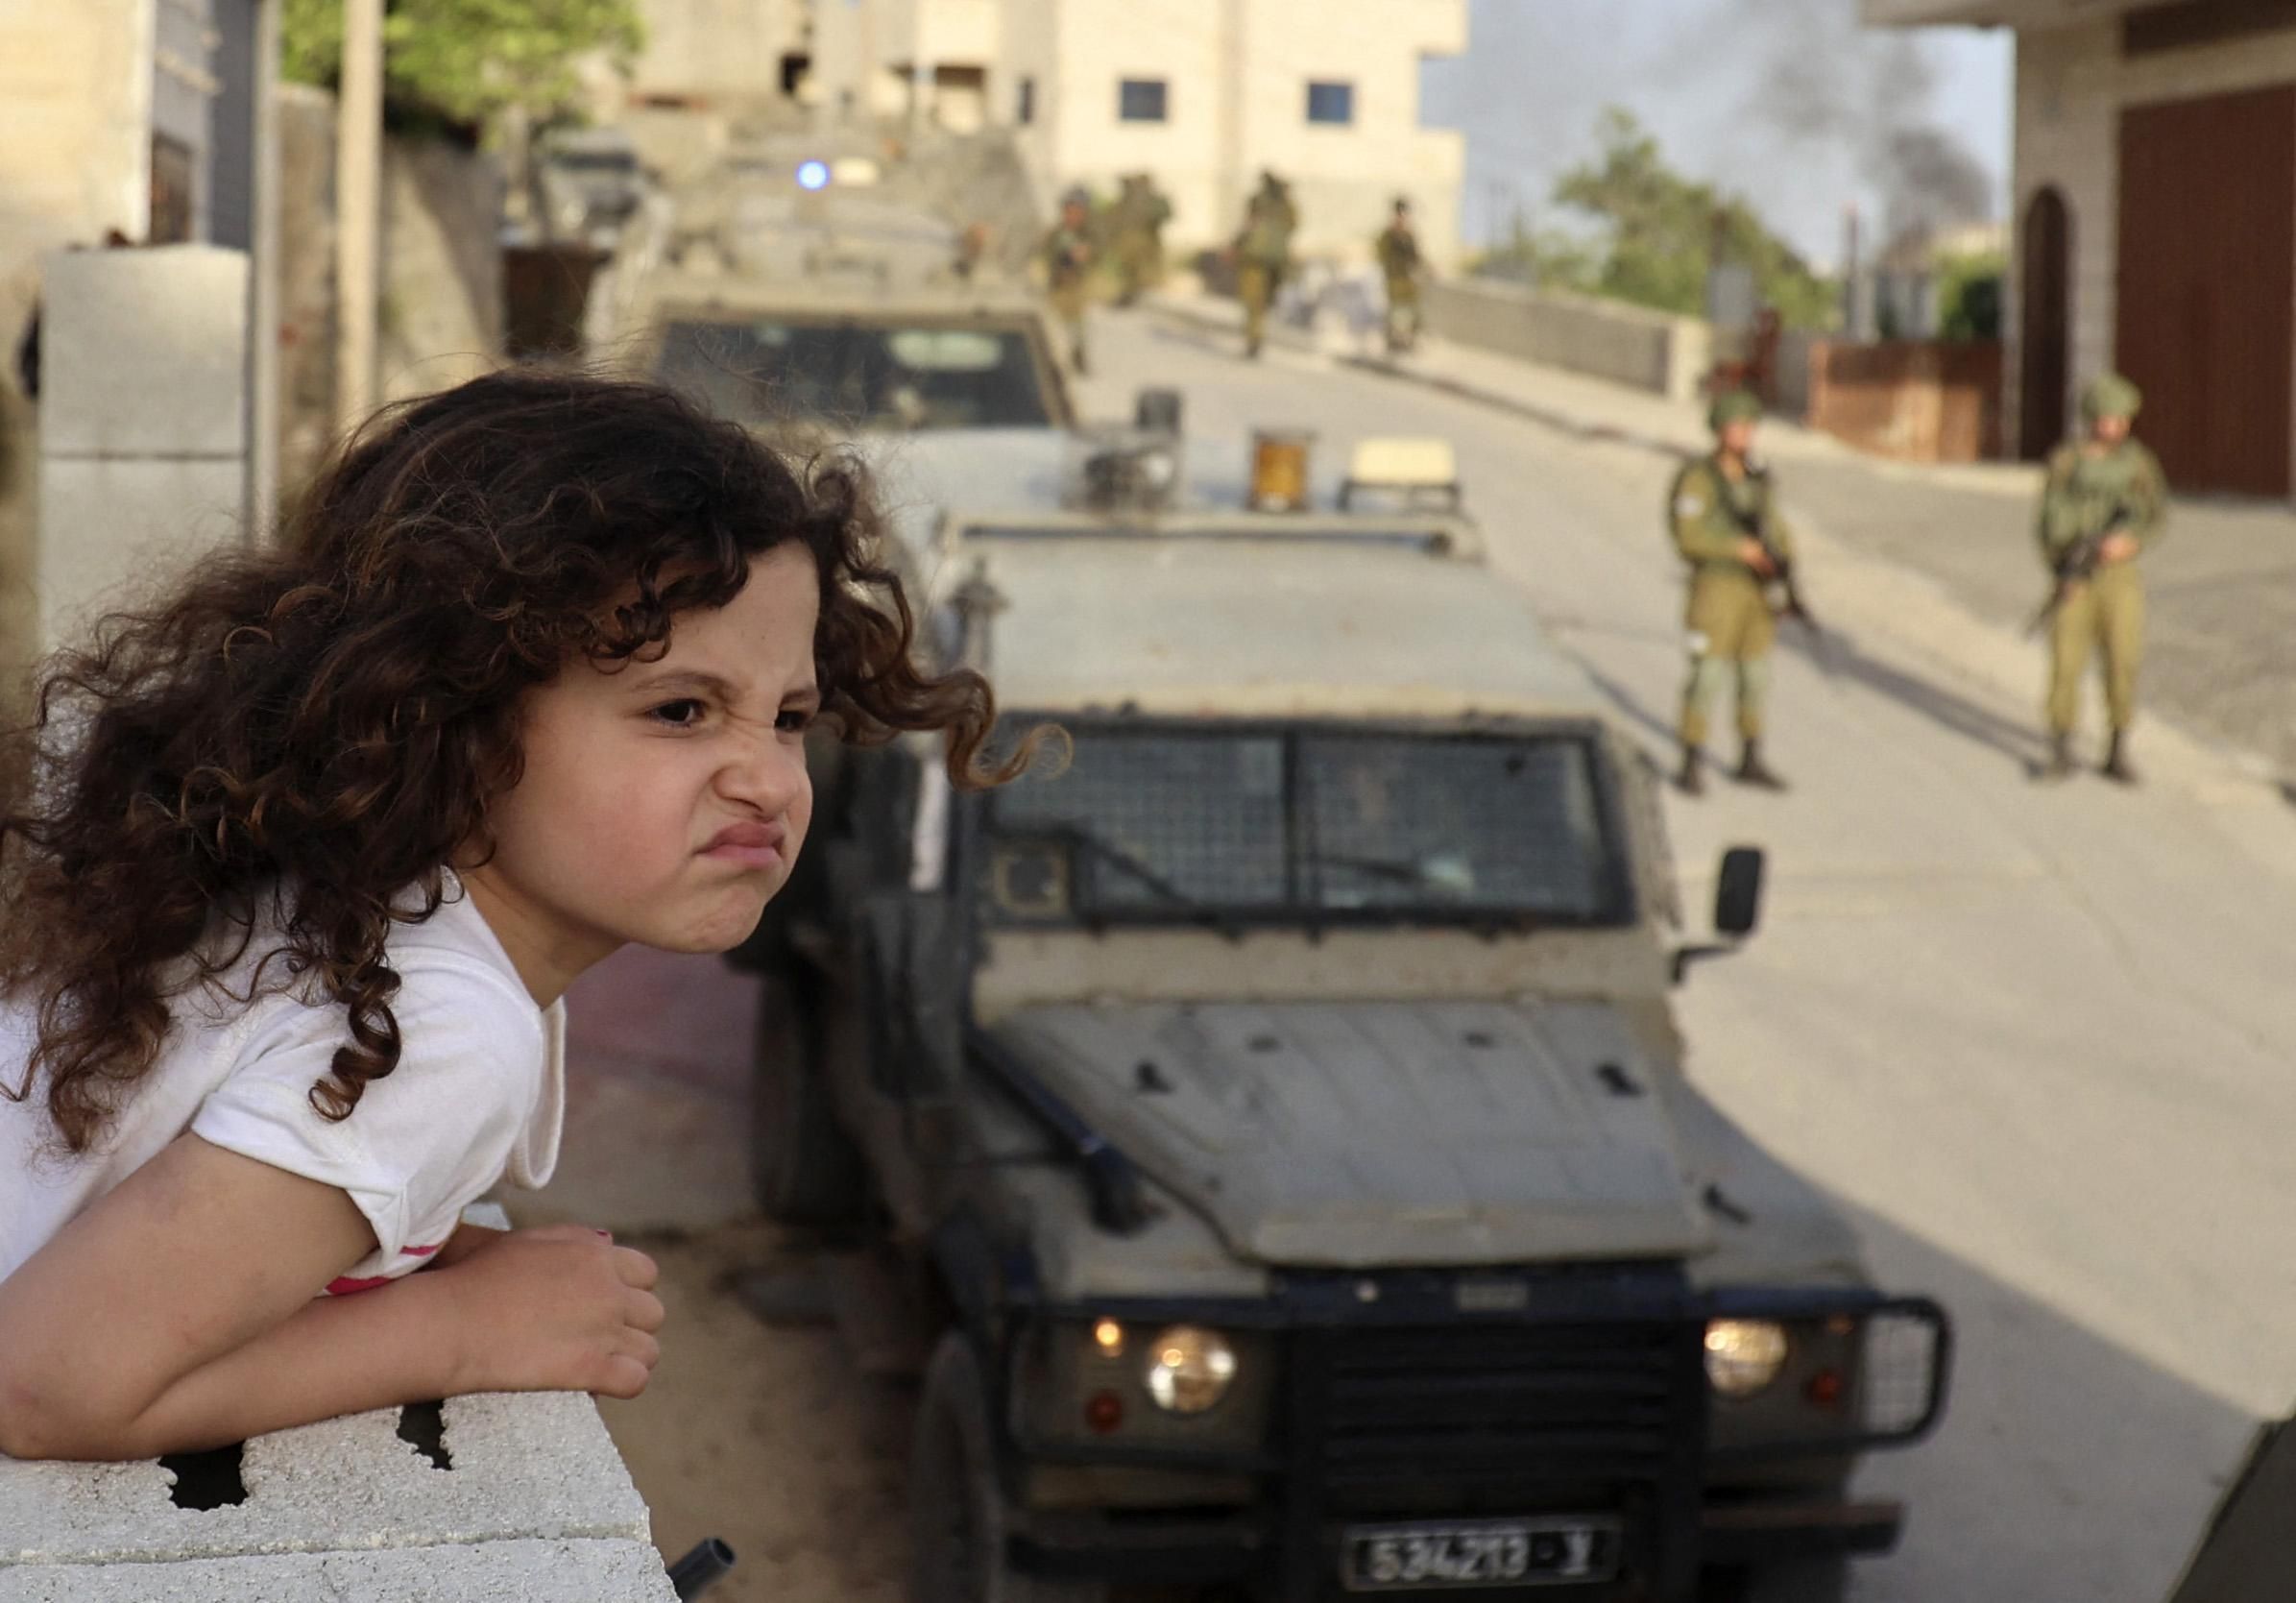 Palestinian girl looking on as Israeli soldiers conduct operation